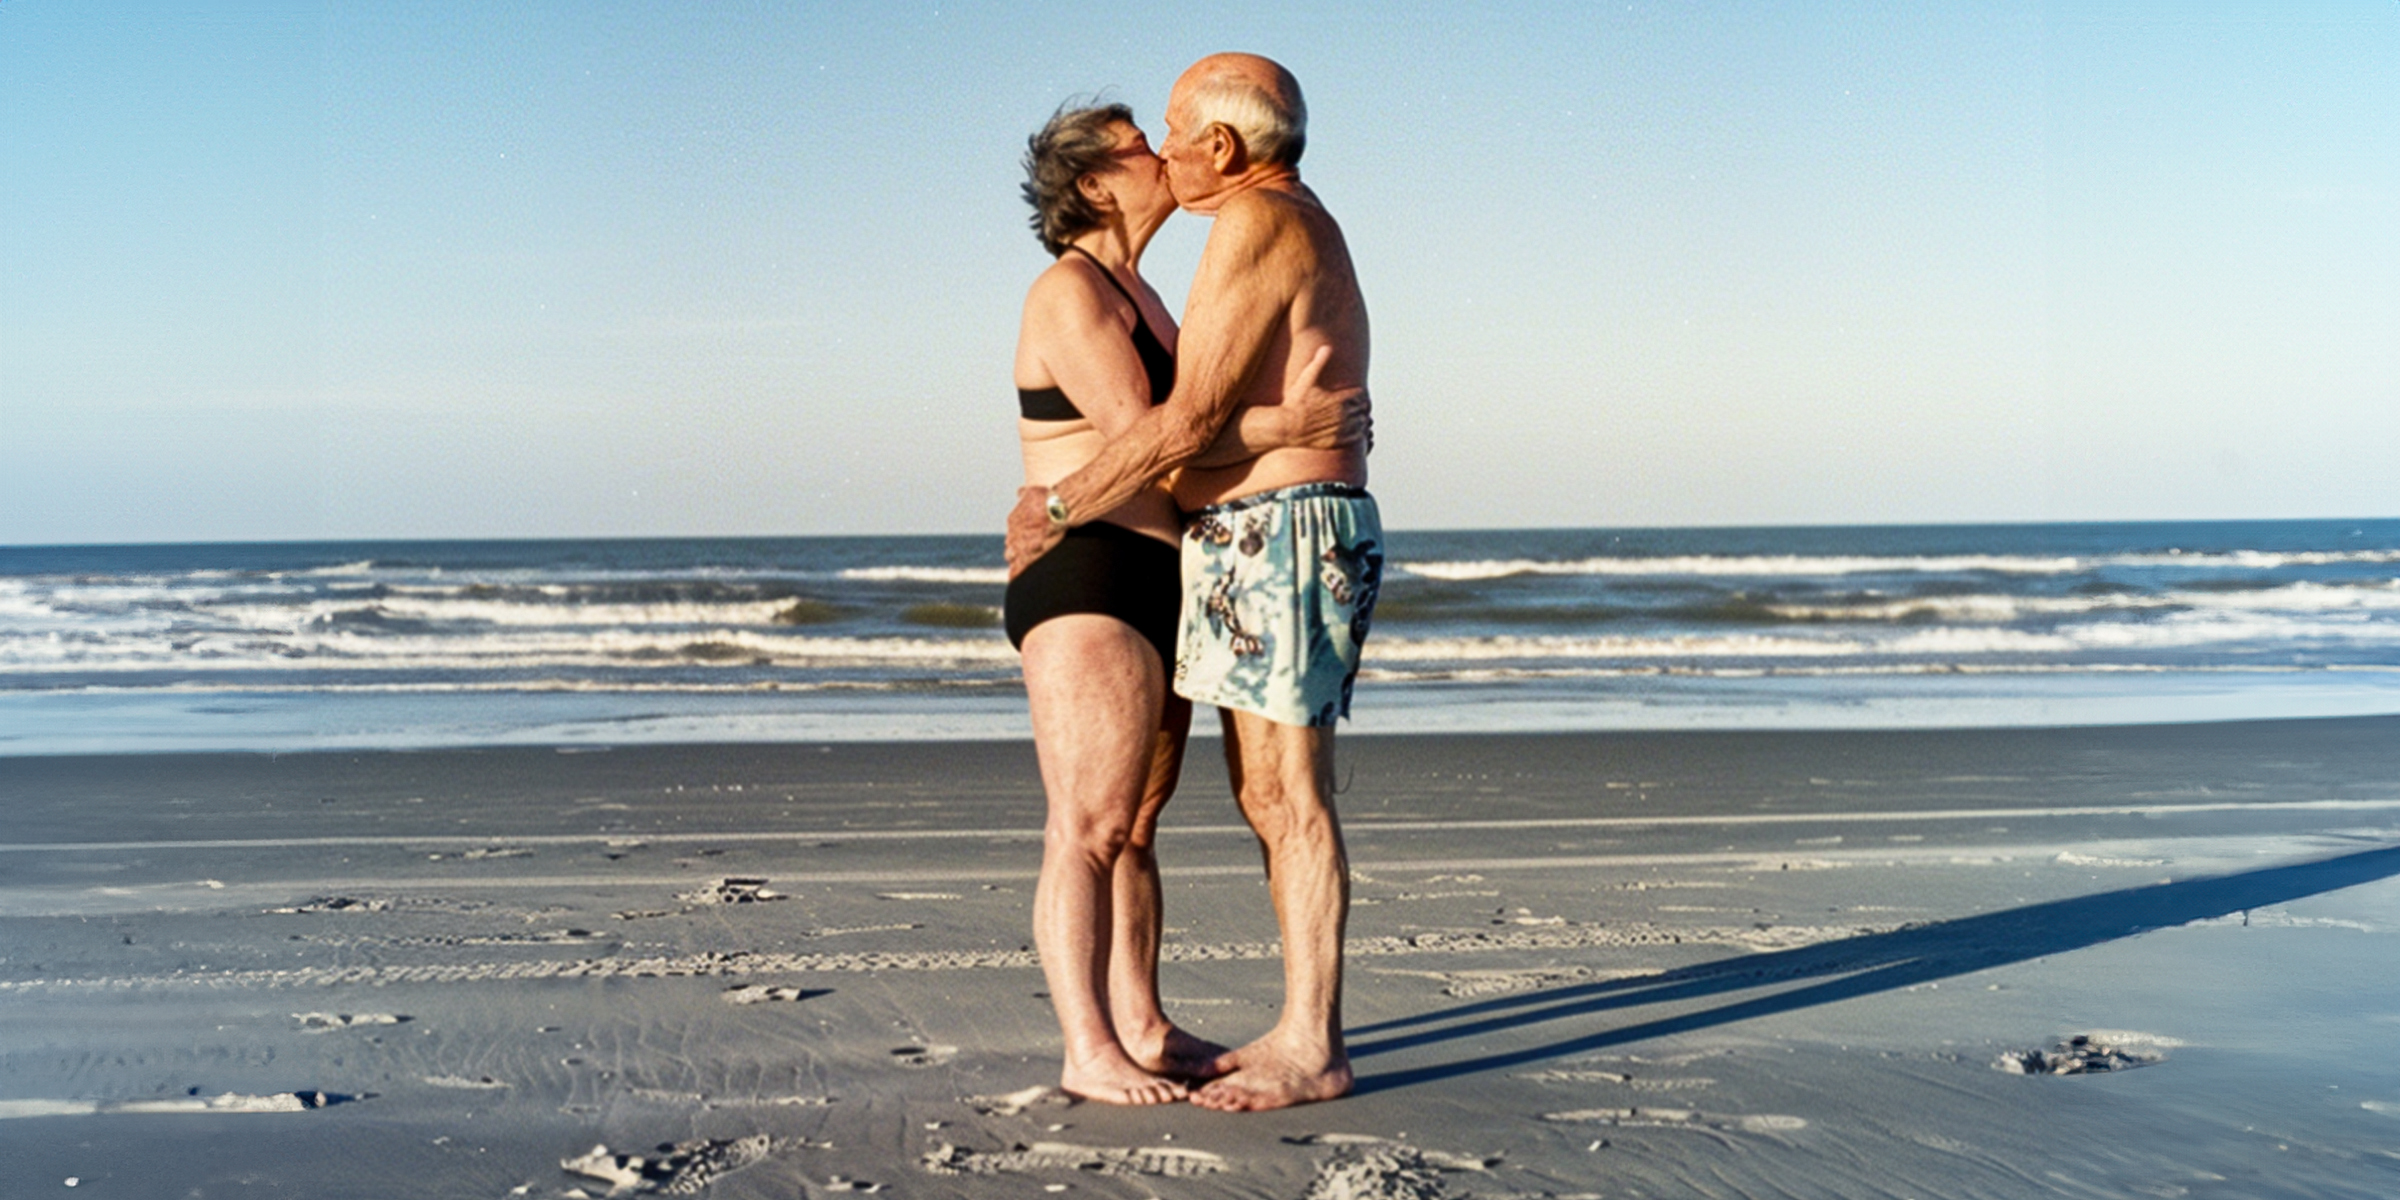 An older couple kissing on the beach | Source: AmoMama